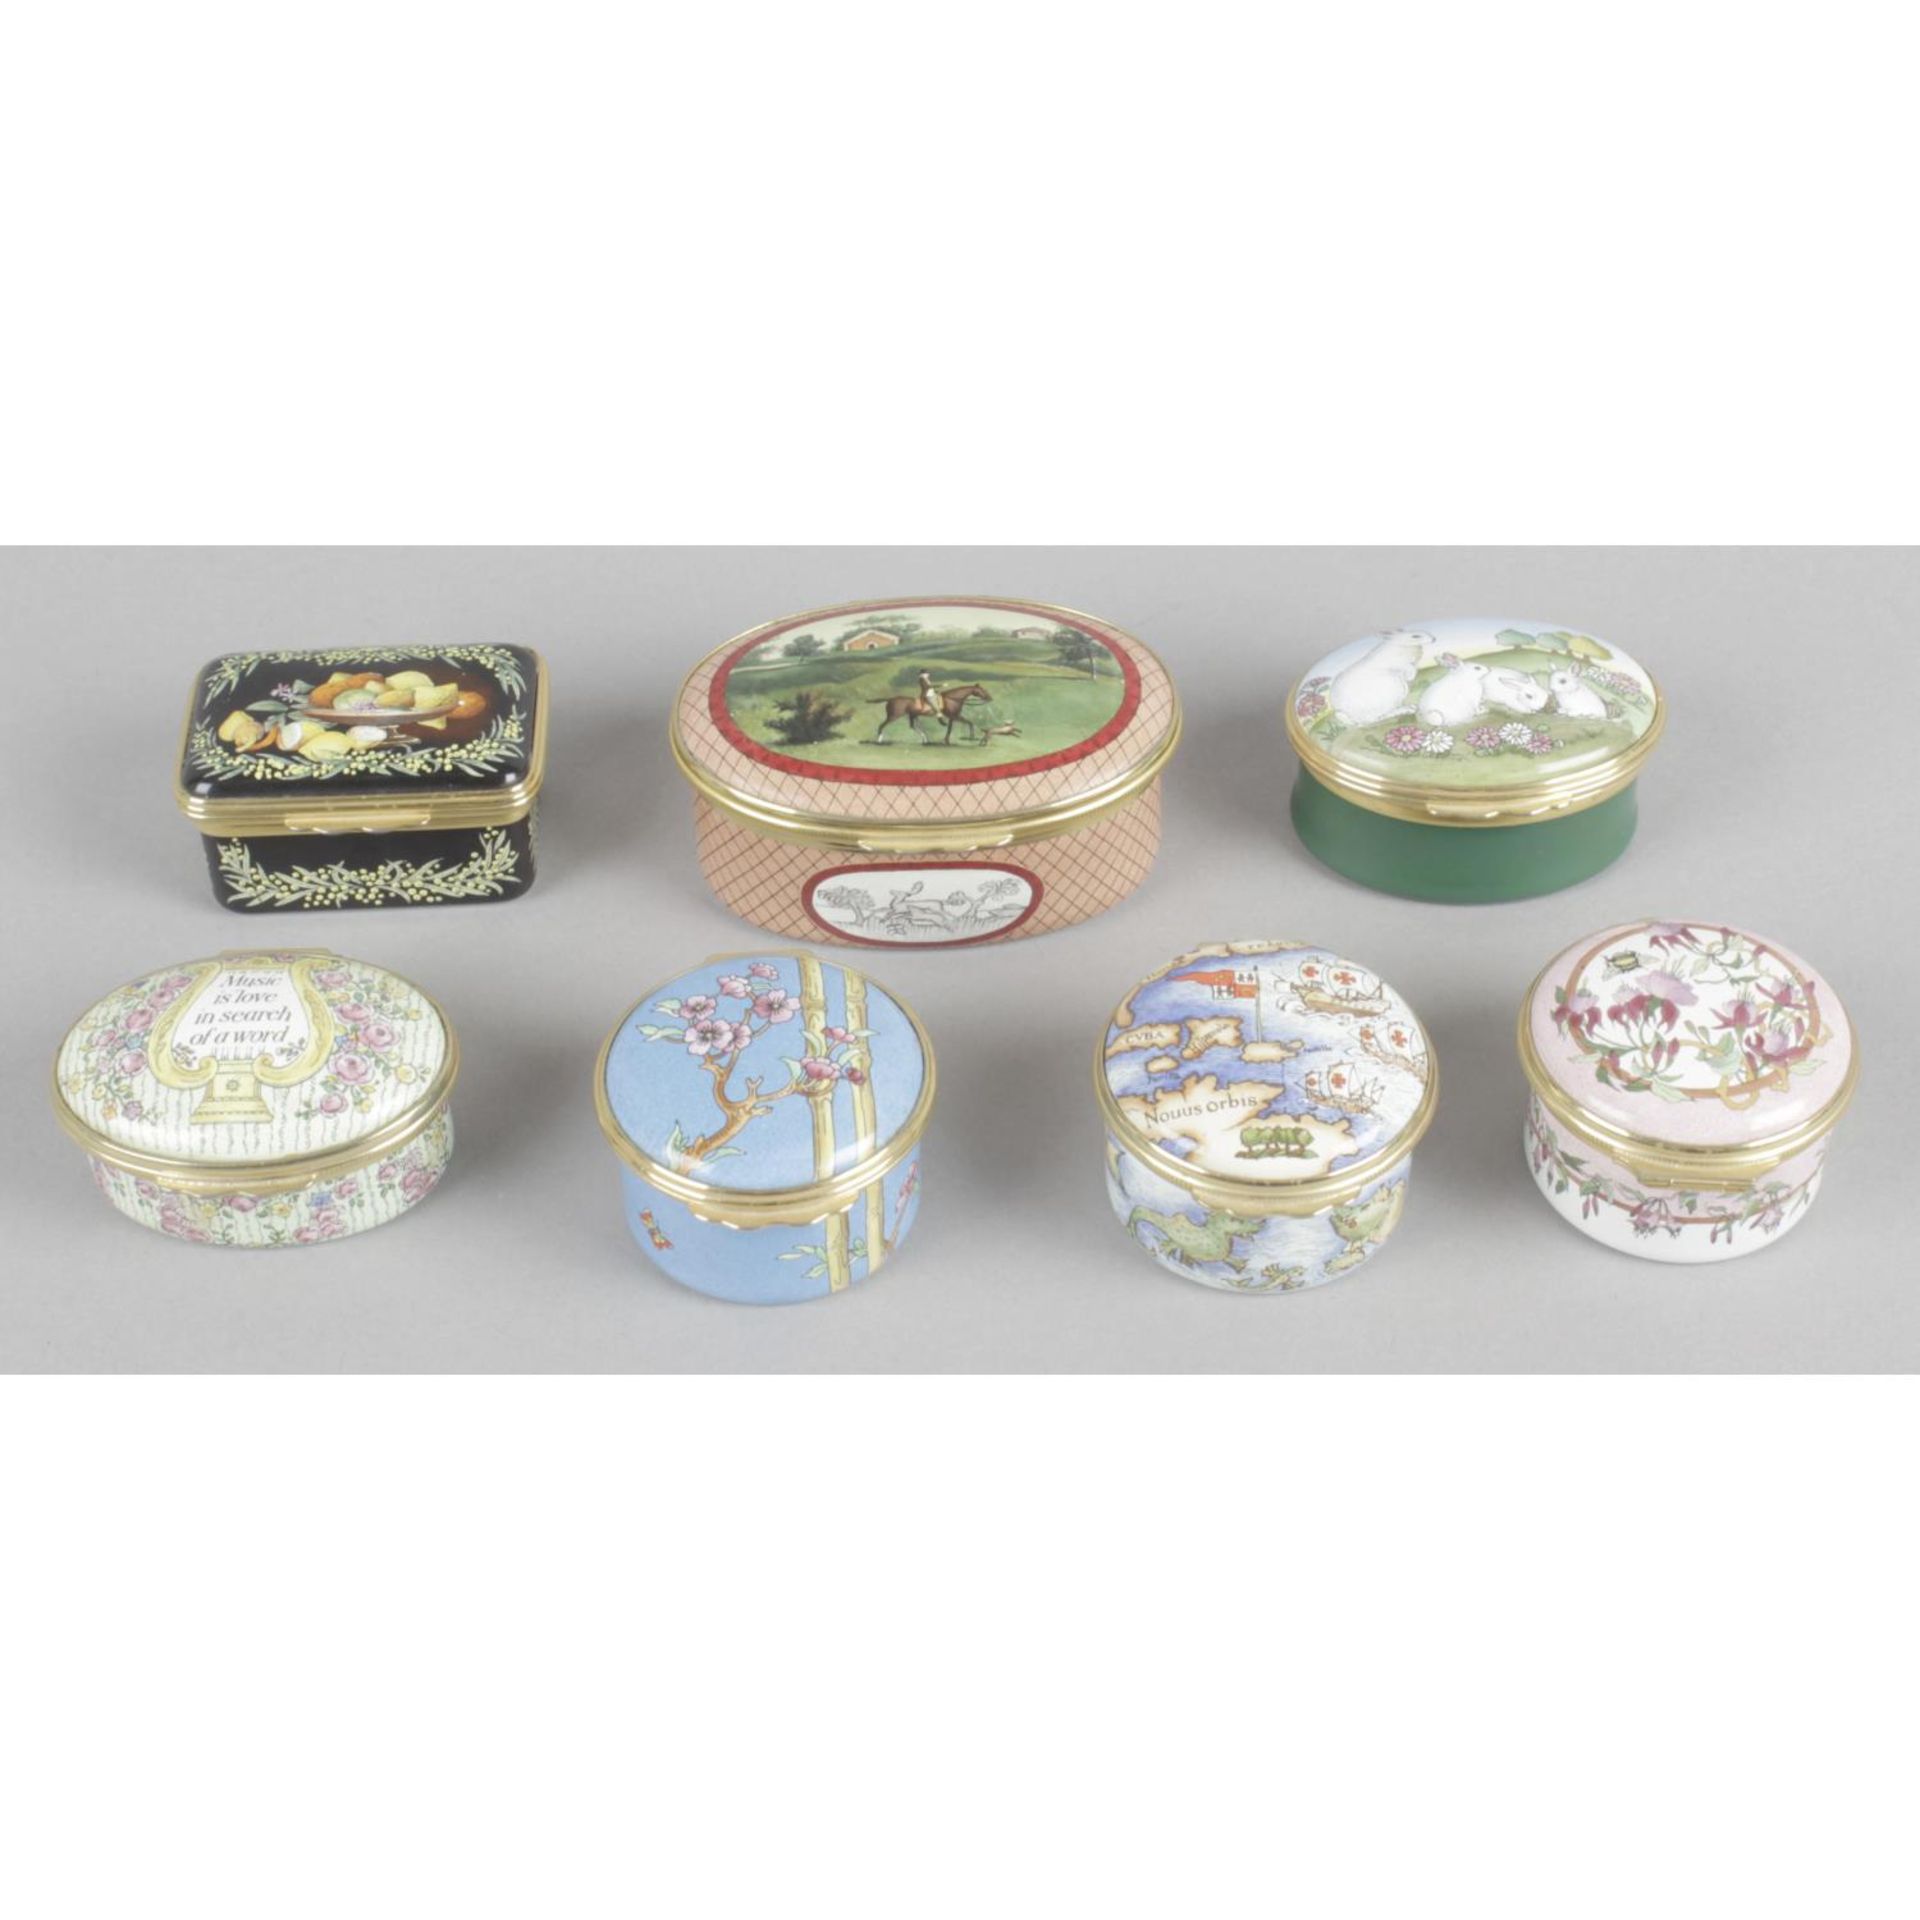 A collection of 16 Halycon days enamelled trinket boxes,